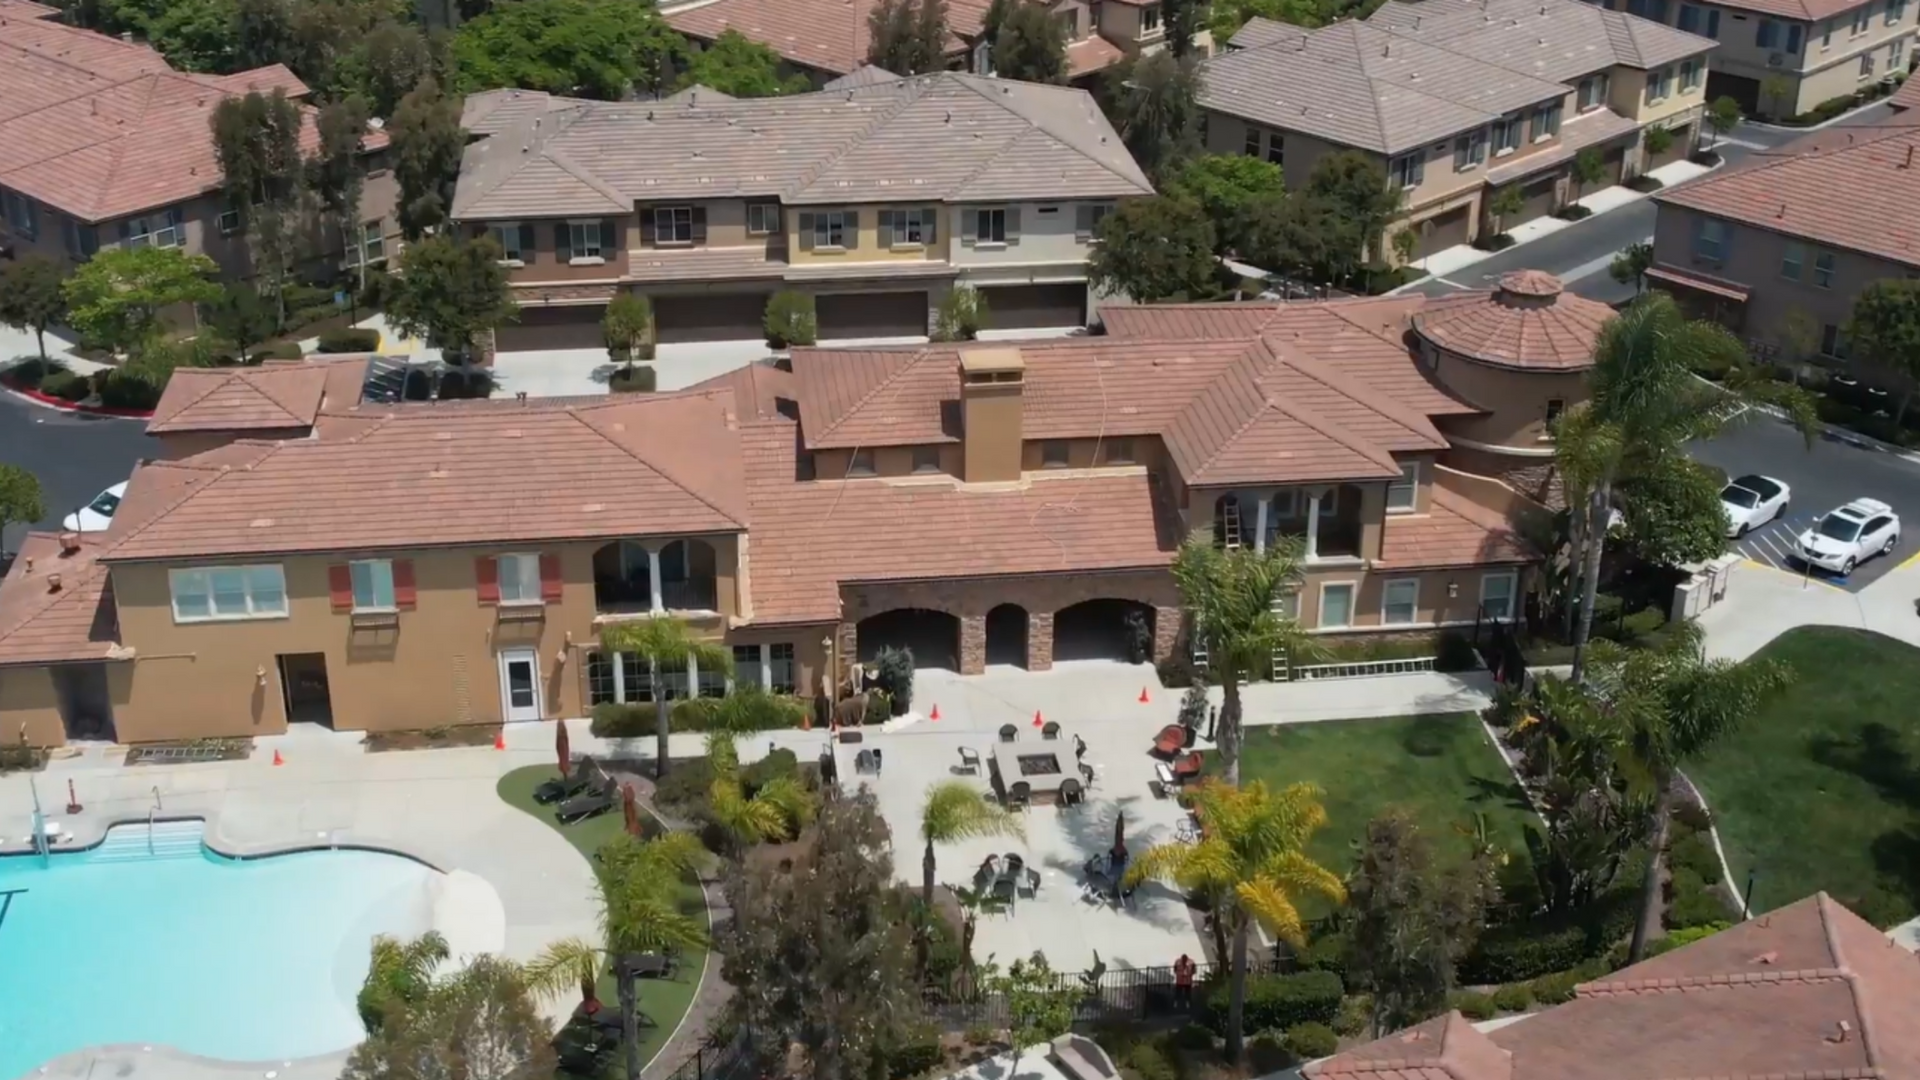 An aerial view of a large house with a pool in front of it.